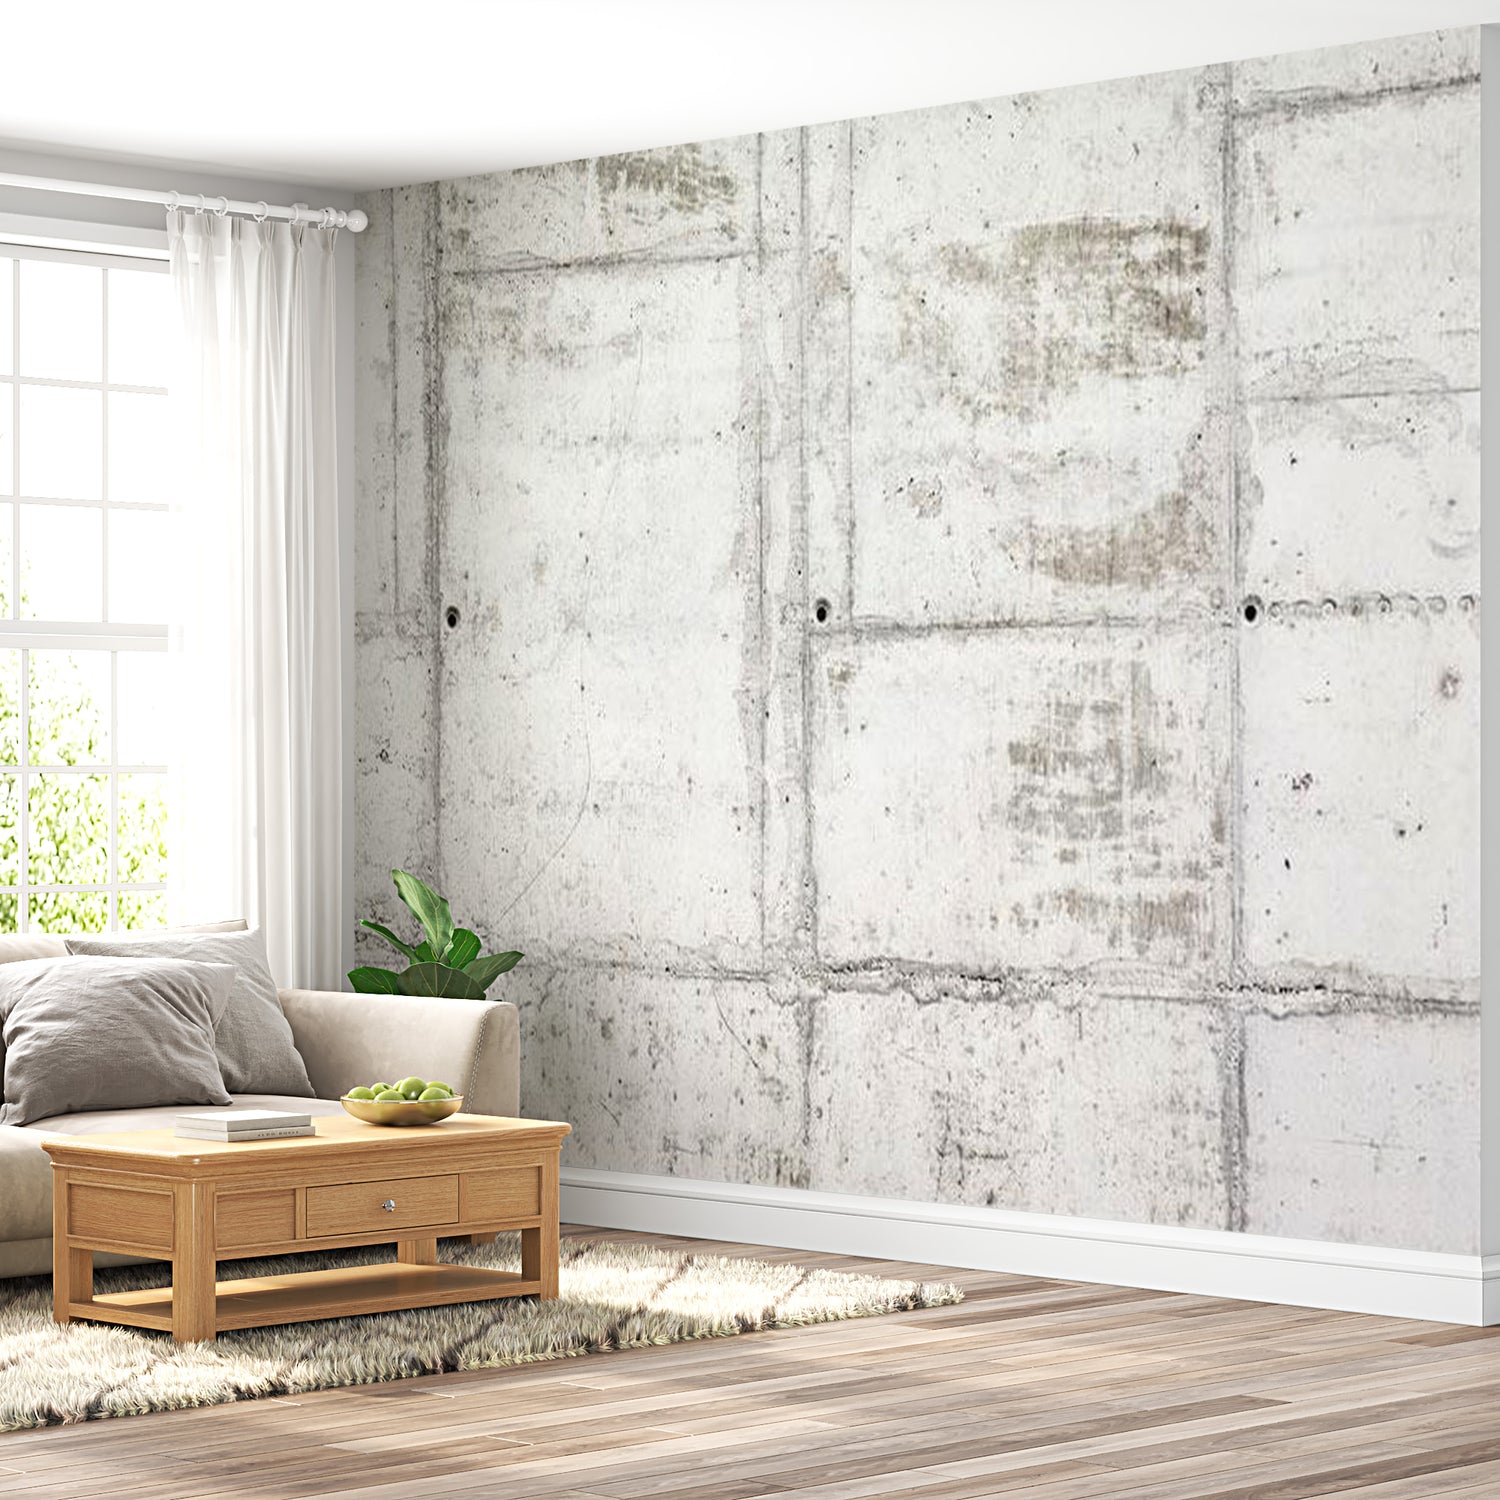 Peel & Stick XXL Wall Mural - Big Concrete Panels - Removable Wall Decals